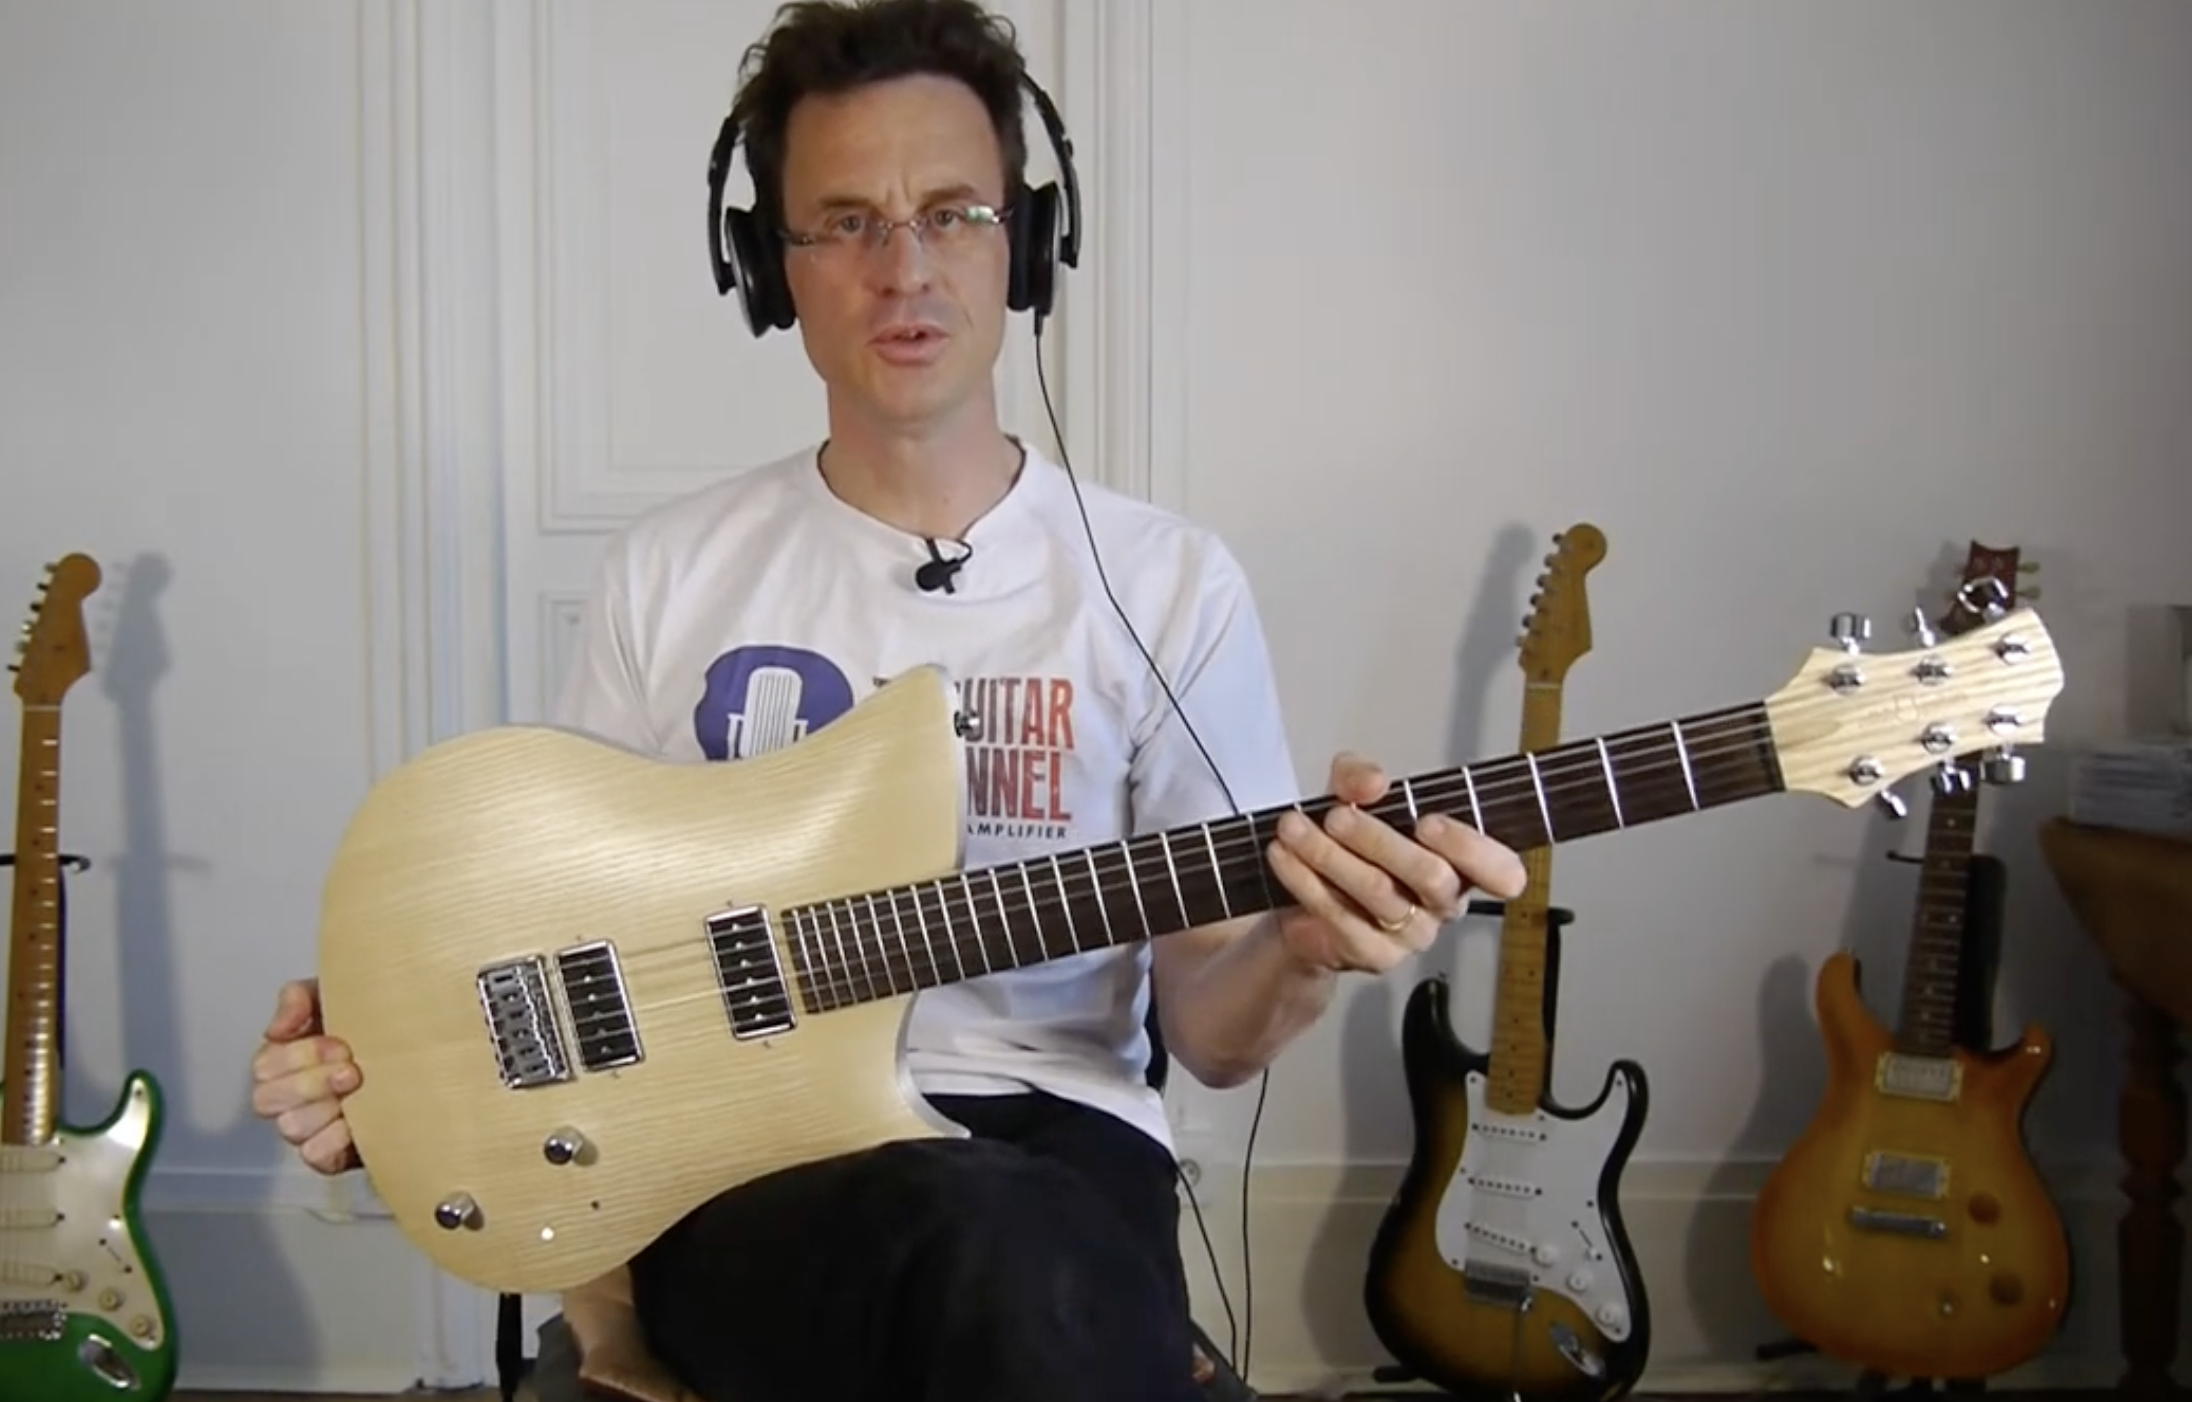 Relish guitar review - The Jane Relish Guitars - Innovative instrument from Switzerland